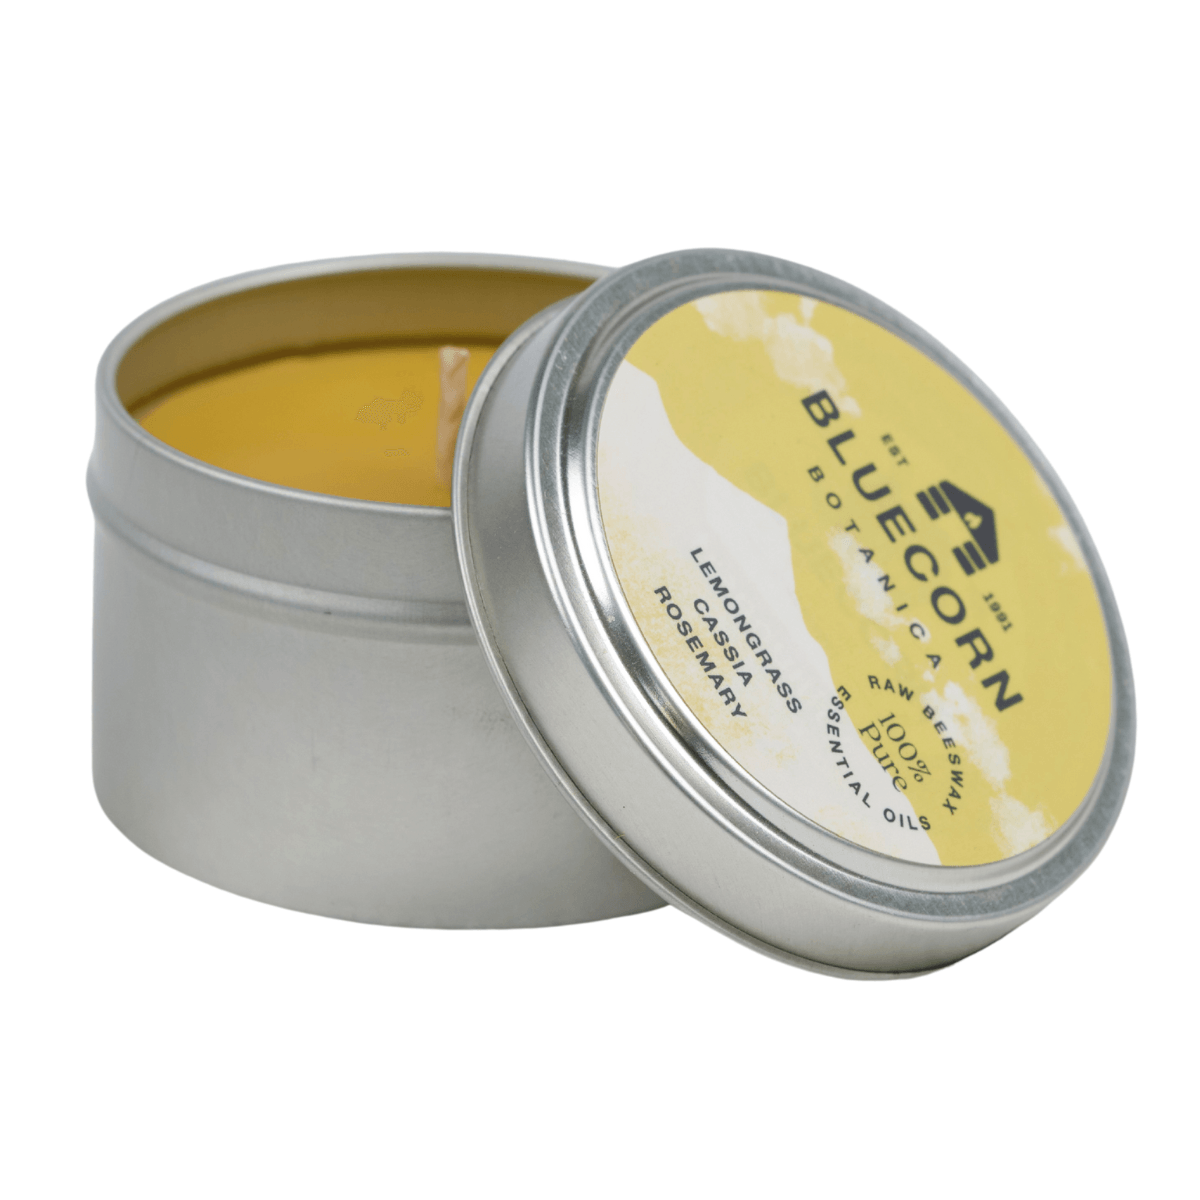 Bluecorn Botanica Lemongrass, Cassia and Rosemary 100% Pure Beeswax Travel Tin Candle. Burn Time: 6oz Candle: 30 Hours. 2oz Candle 12 Hours. Made with 100% Pure Beeswax and 100% Pure Essential Oils. Made with 100% pure cotton wick, no lead and paraffin free. Clean burning and non-toxic. Features Bluecorn Botanica Label in recyclable aluminum tin. Perfect for travel, camping and gifts. 